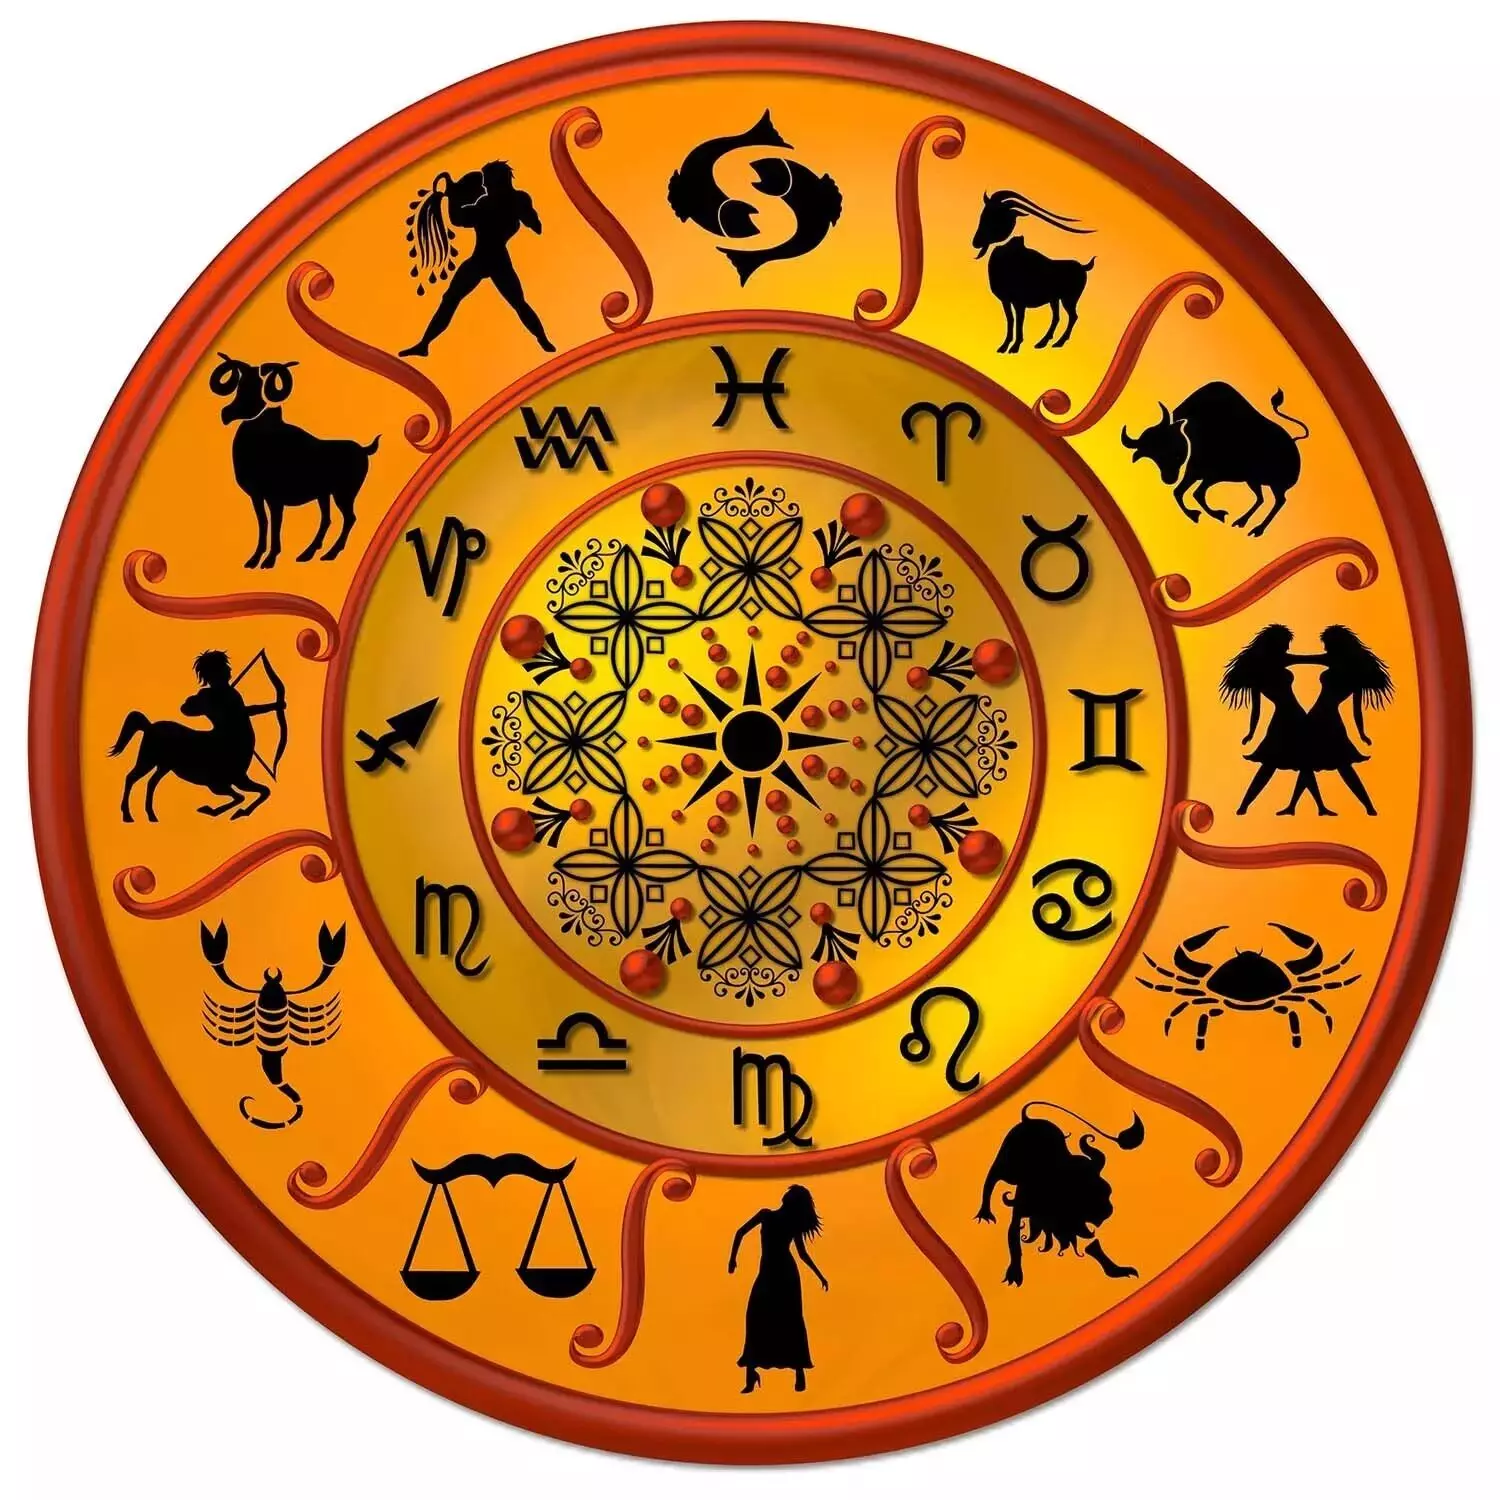 15 May – Know your todays horoscope